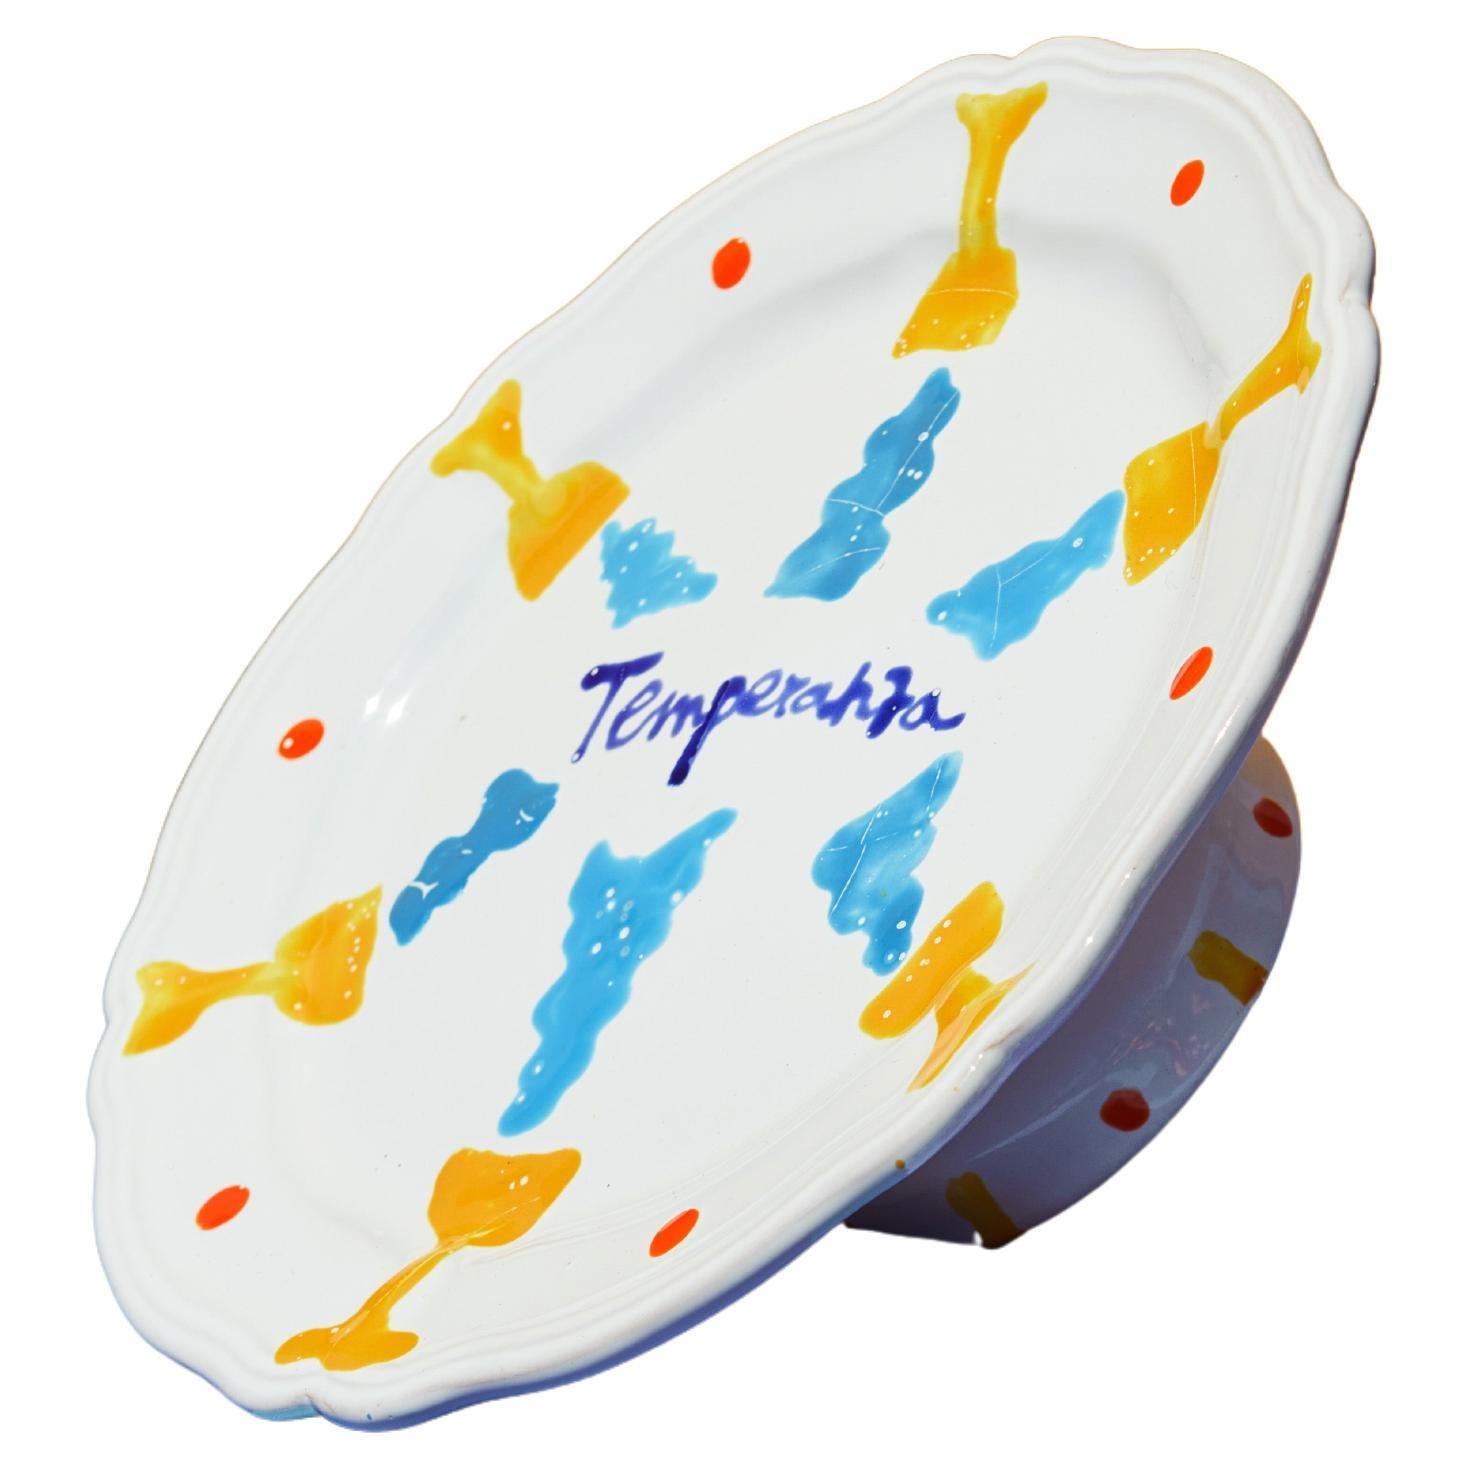 Handmade and Hand glazed ceramic, Made in Italy
Dishwasher-safe
21x Ø13 cm

This Handcrafted and hand-glazed ceramic tray is made in Grottaglie (Puglia), one of the most acknowledged Italian hubs for ceramics, and it is entirely hand glazed and